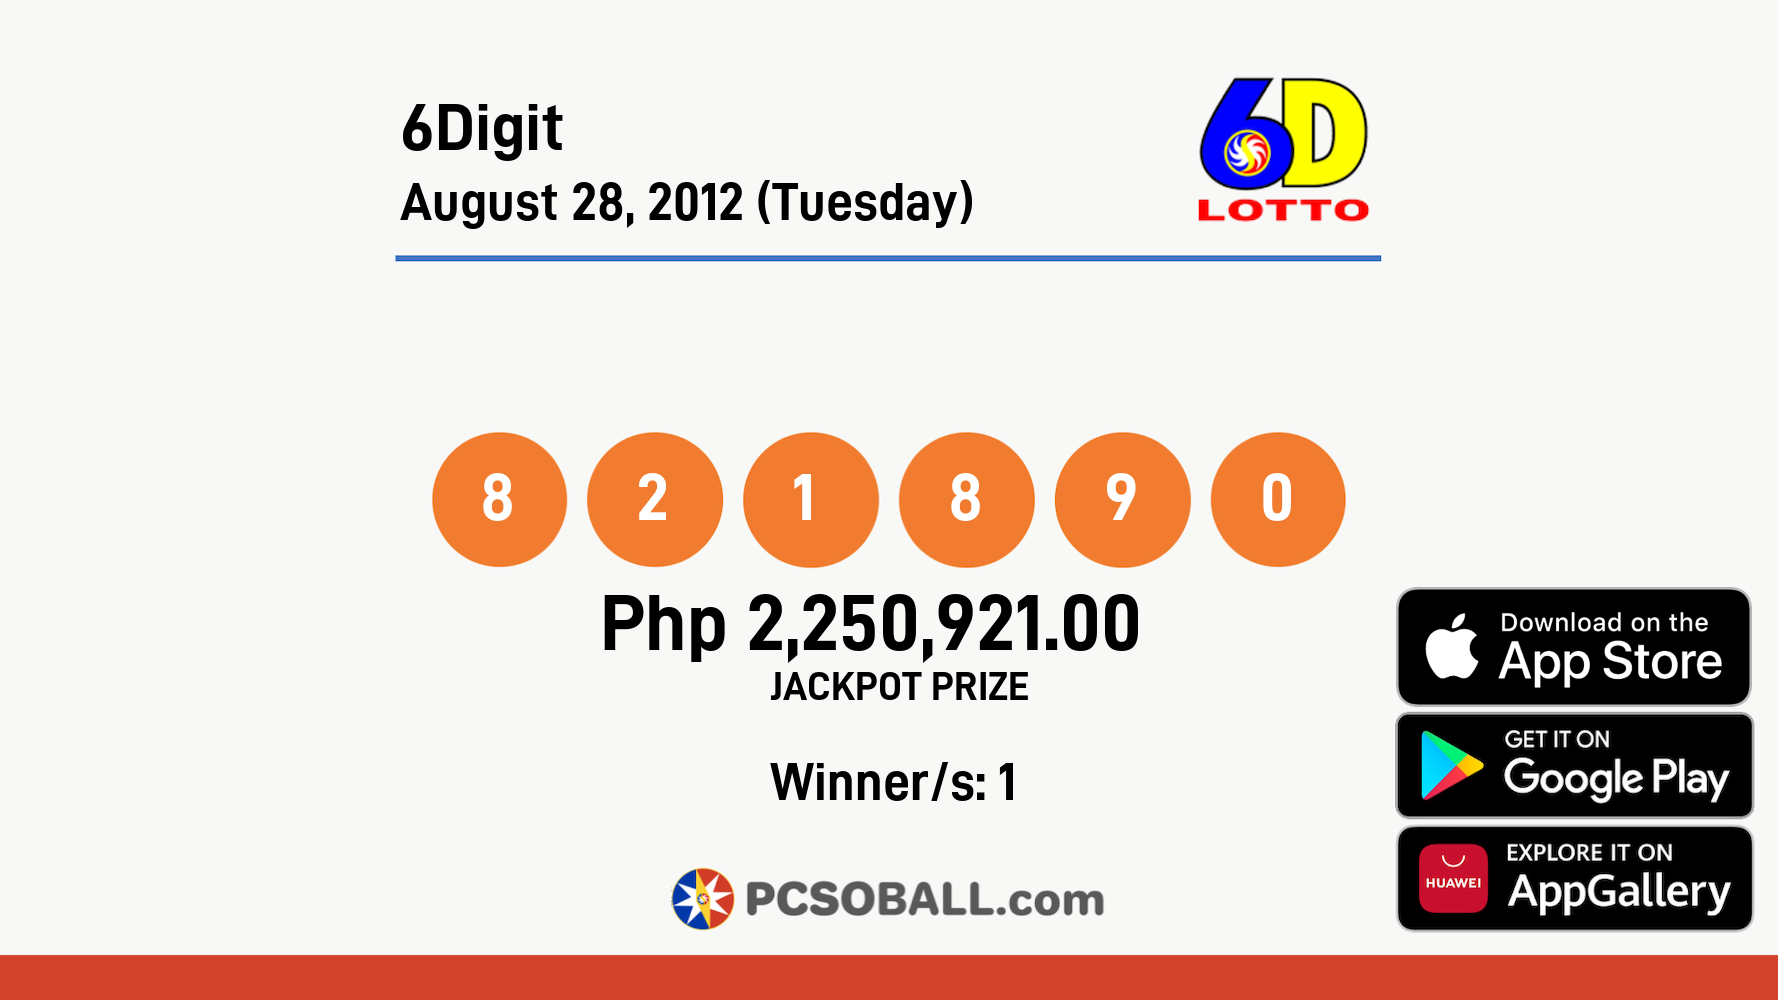 6Digit August 28, 2012 (Tuesday) Result